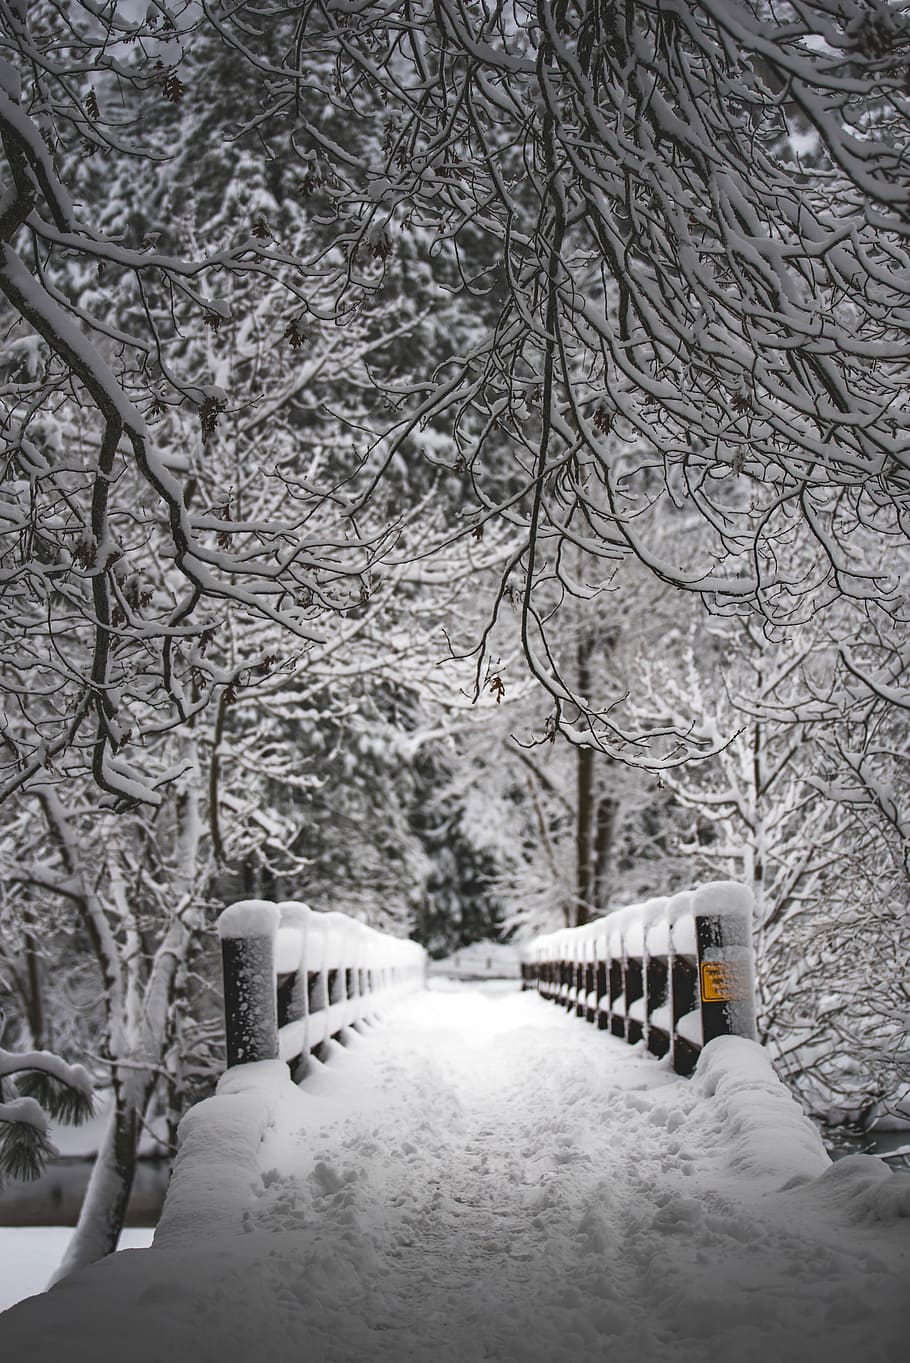 snow covered metal footed bridge in grayscale photography, concrete bridge covered with snow during daytime, HD wallpaper